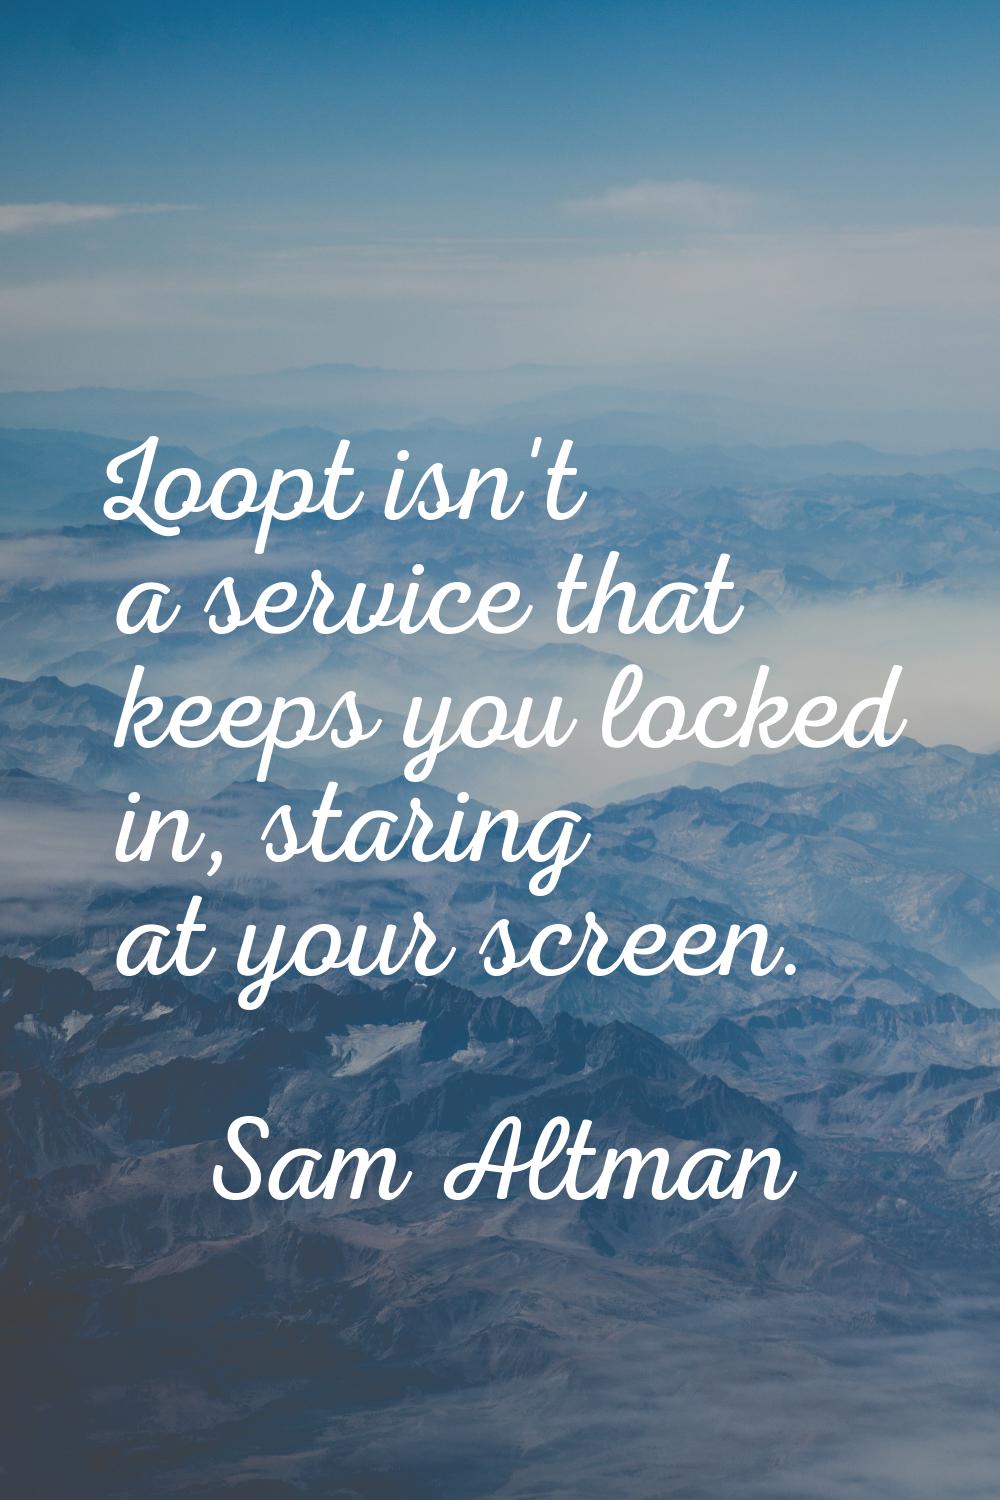 Loopt isn't a service that keeps you locked in, staring at your screen.